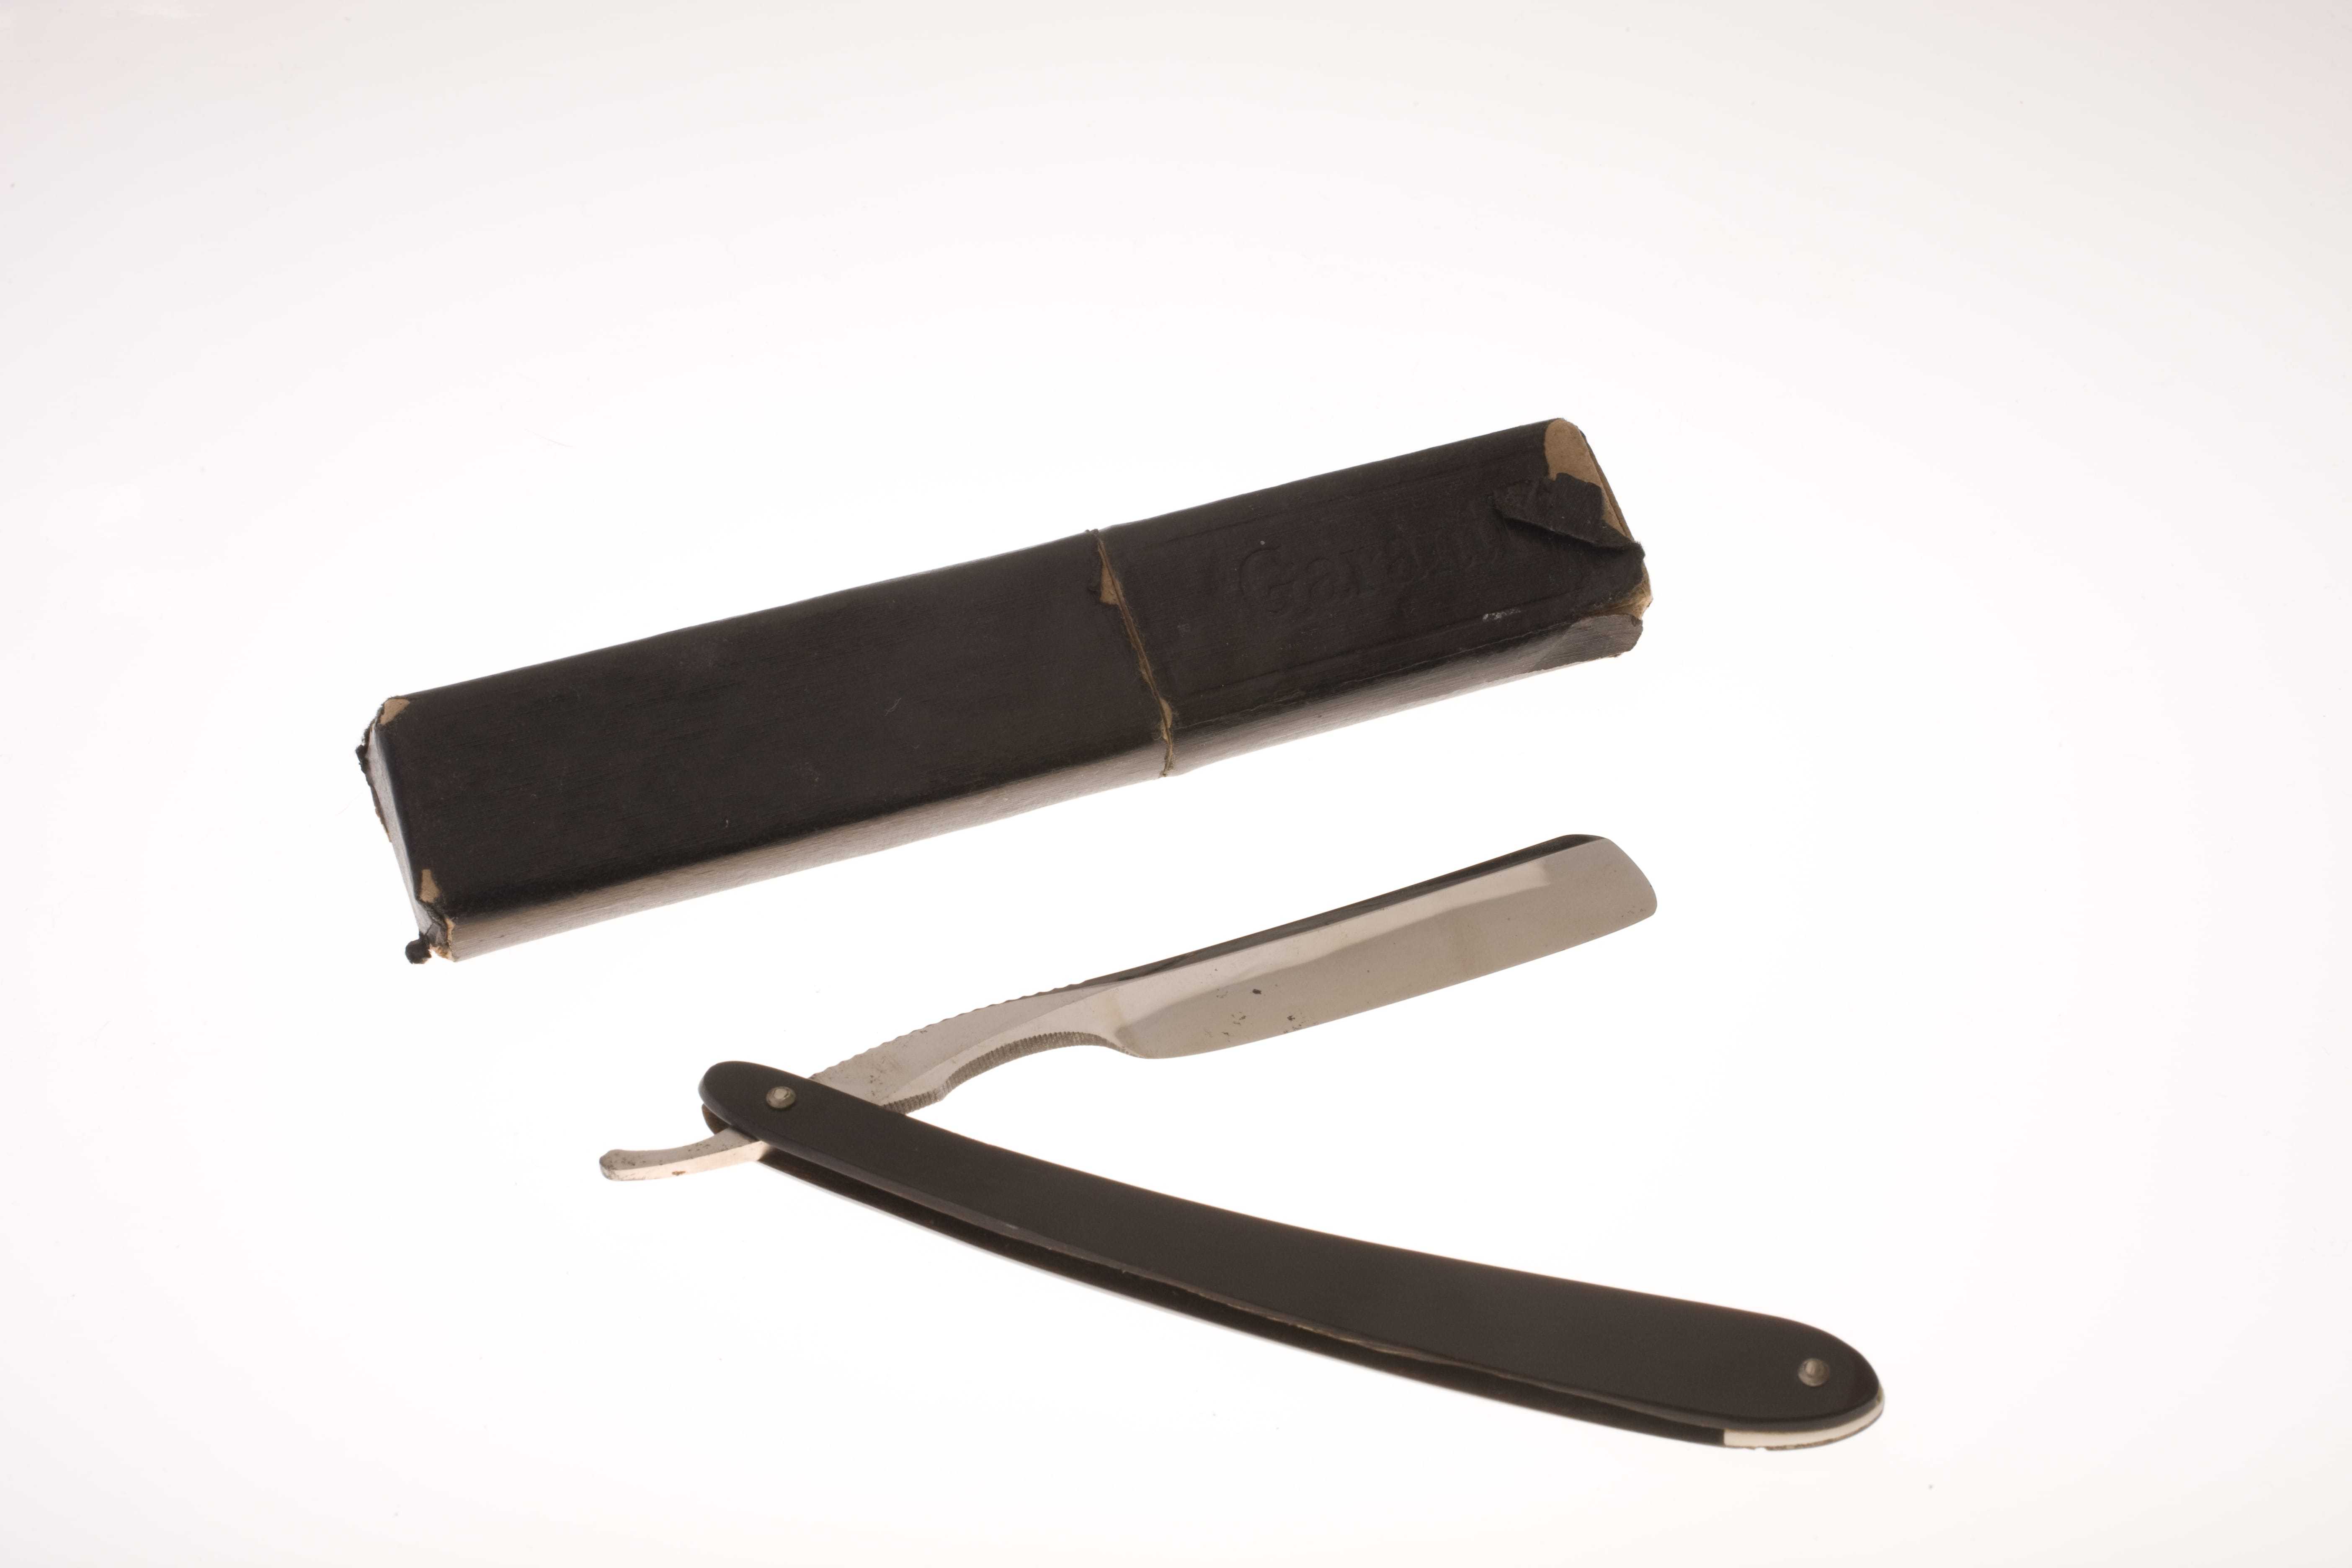 A shaving razor with a slim brown handle and a brown case